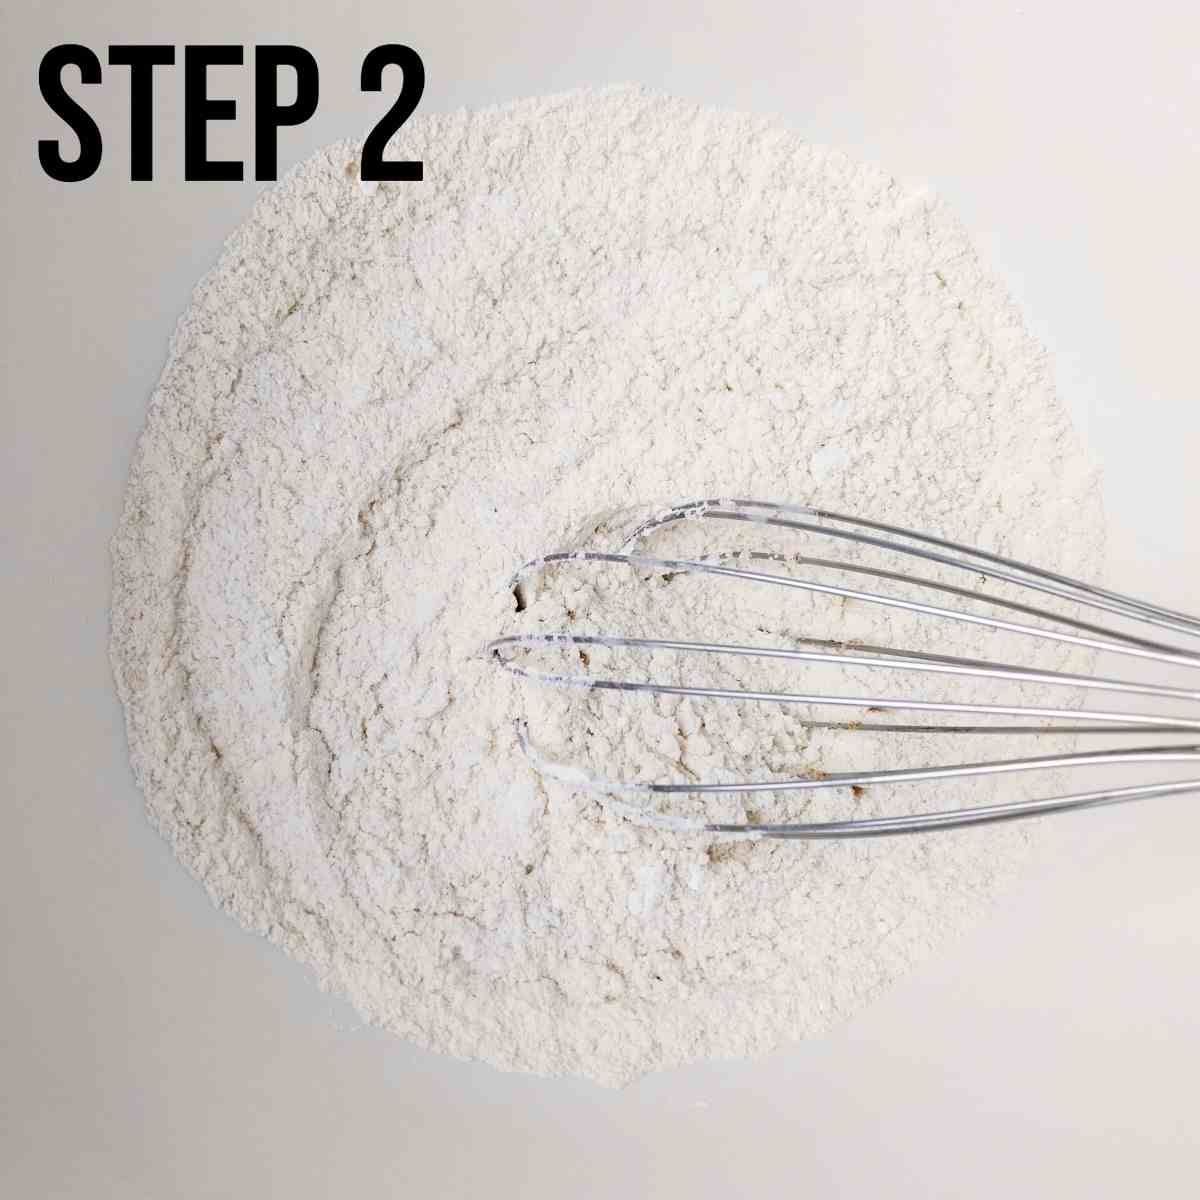 Mixing the dry ingredients in a large white bowl with a whisk.